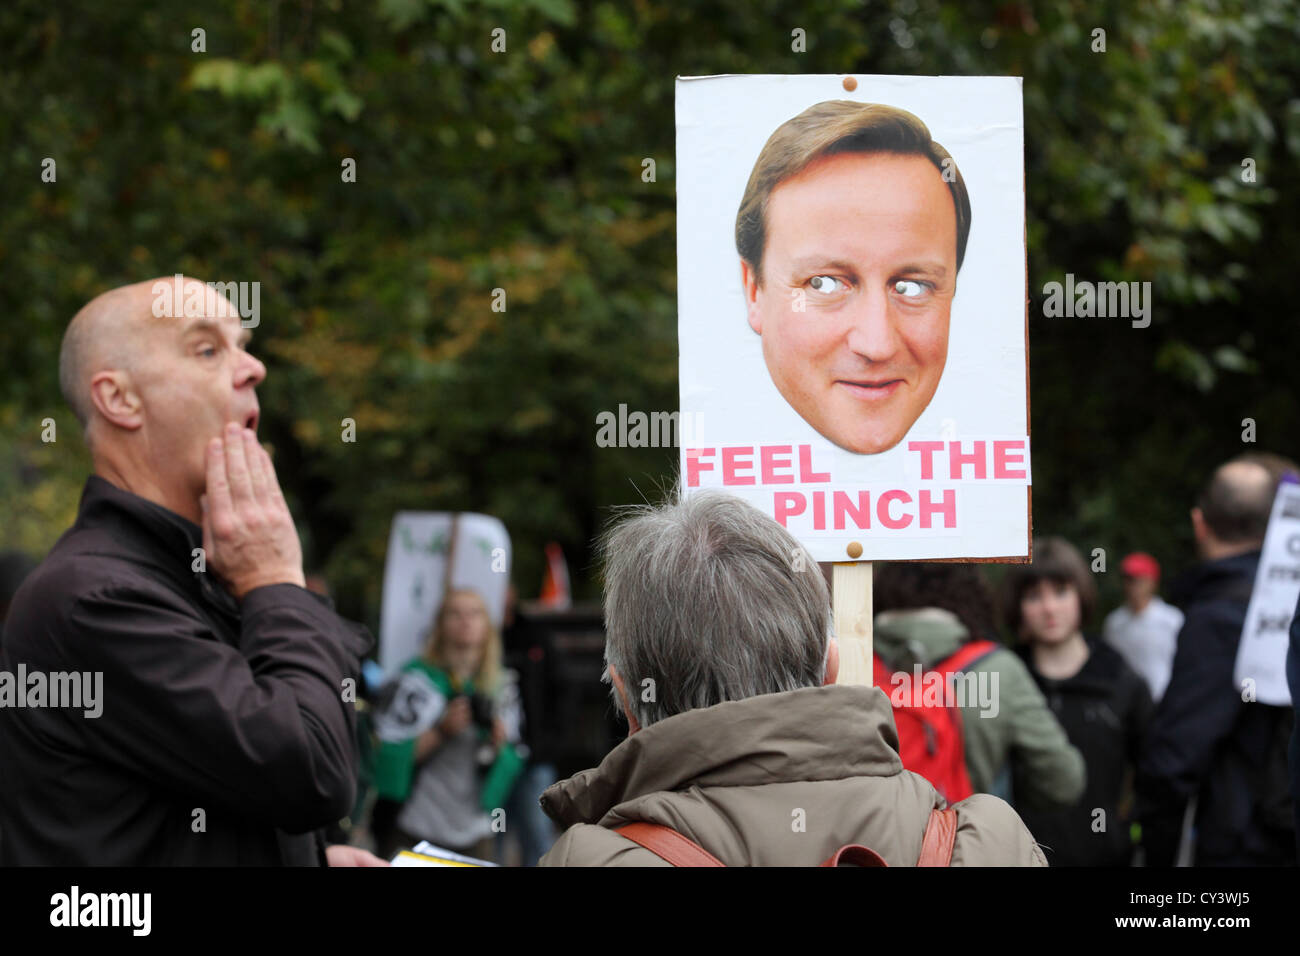 Poster placard caricaturing David Cameron reading 'Feel the Pinch' TUC anti austerity government cuts march rally, London, UK Stock Photo